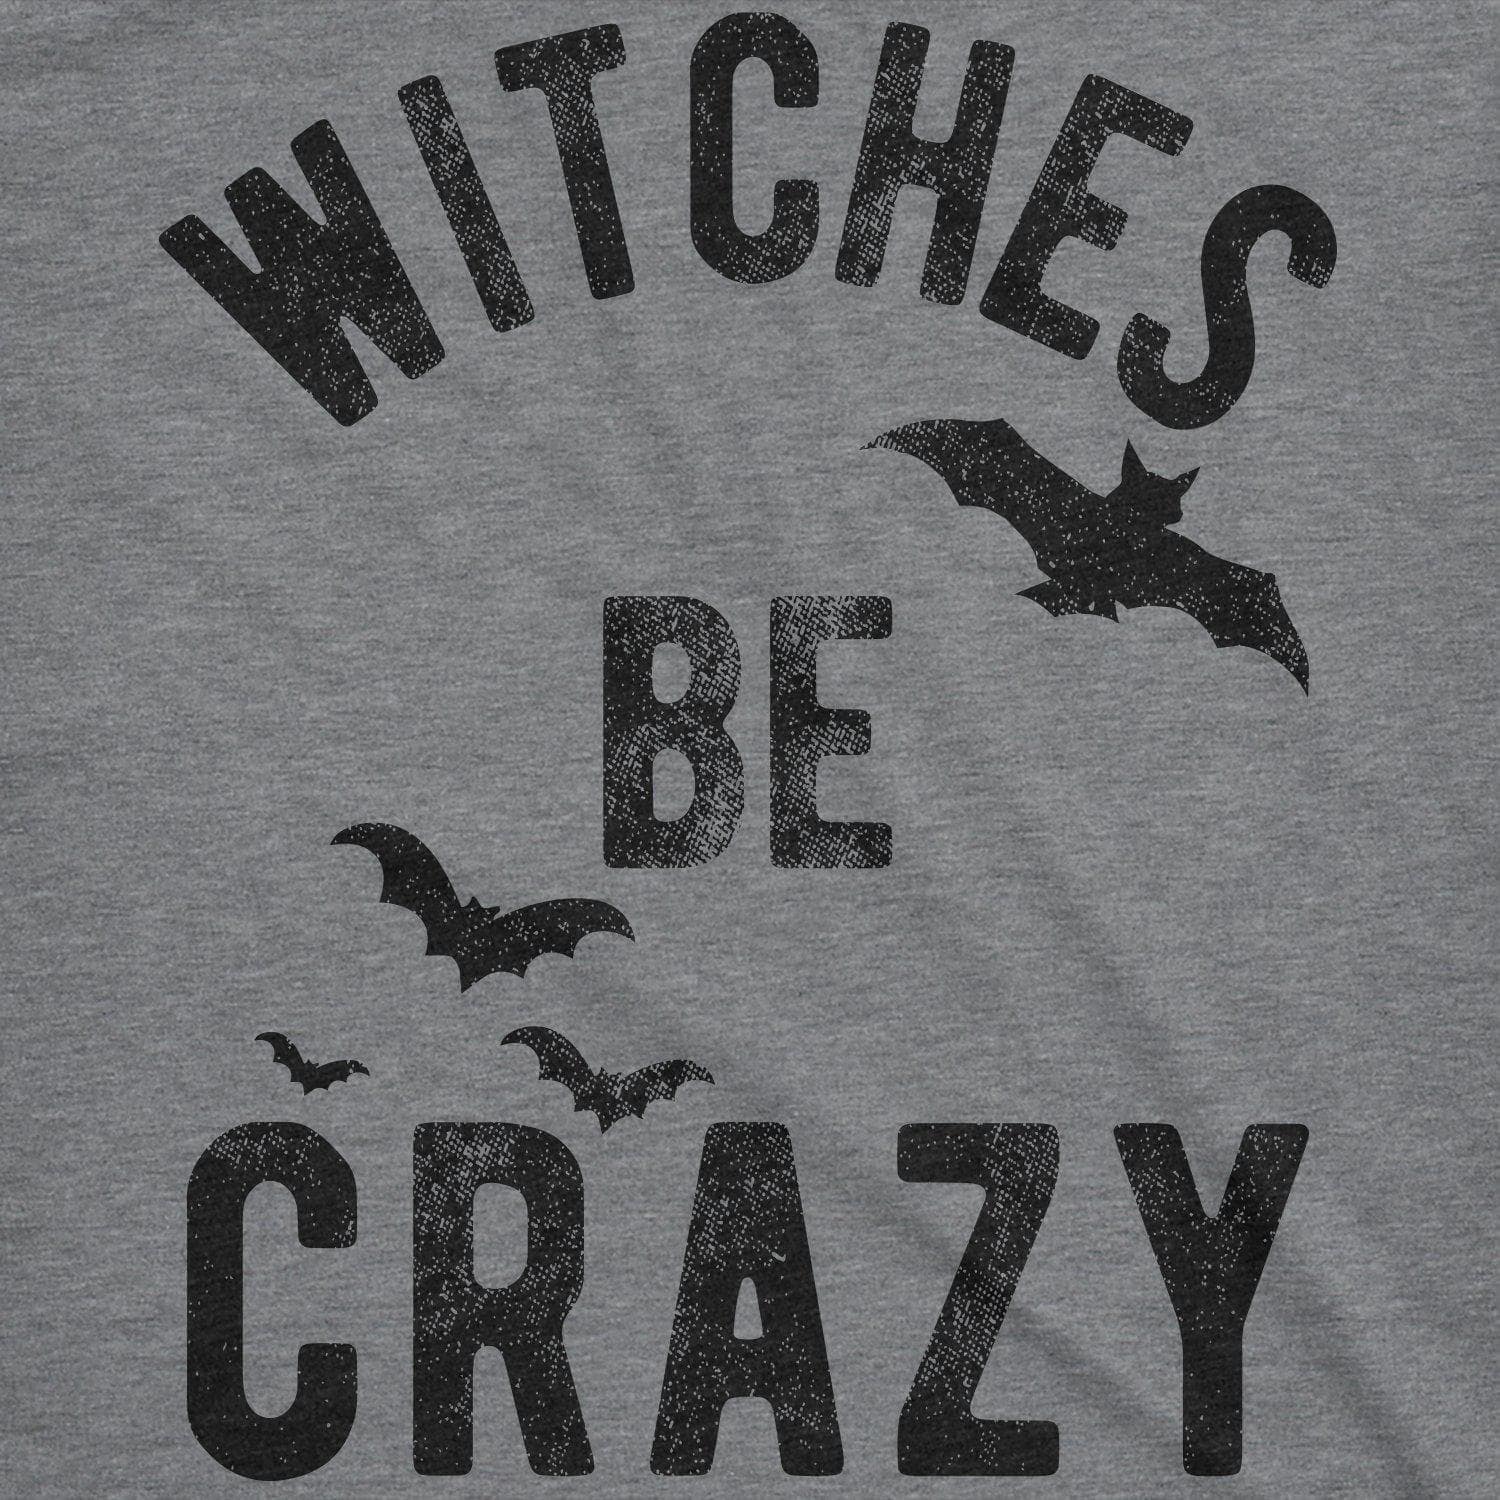 Witches Be Crazy Men's Tshirt  -  Crazy Dog T-Shirts